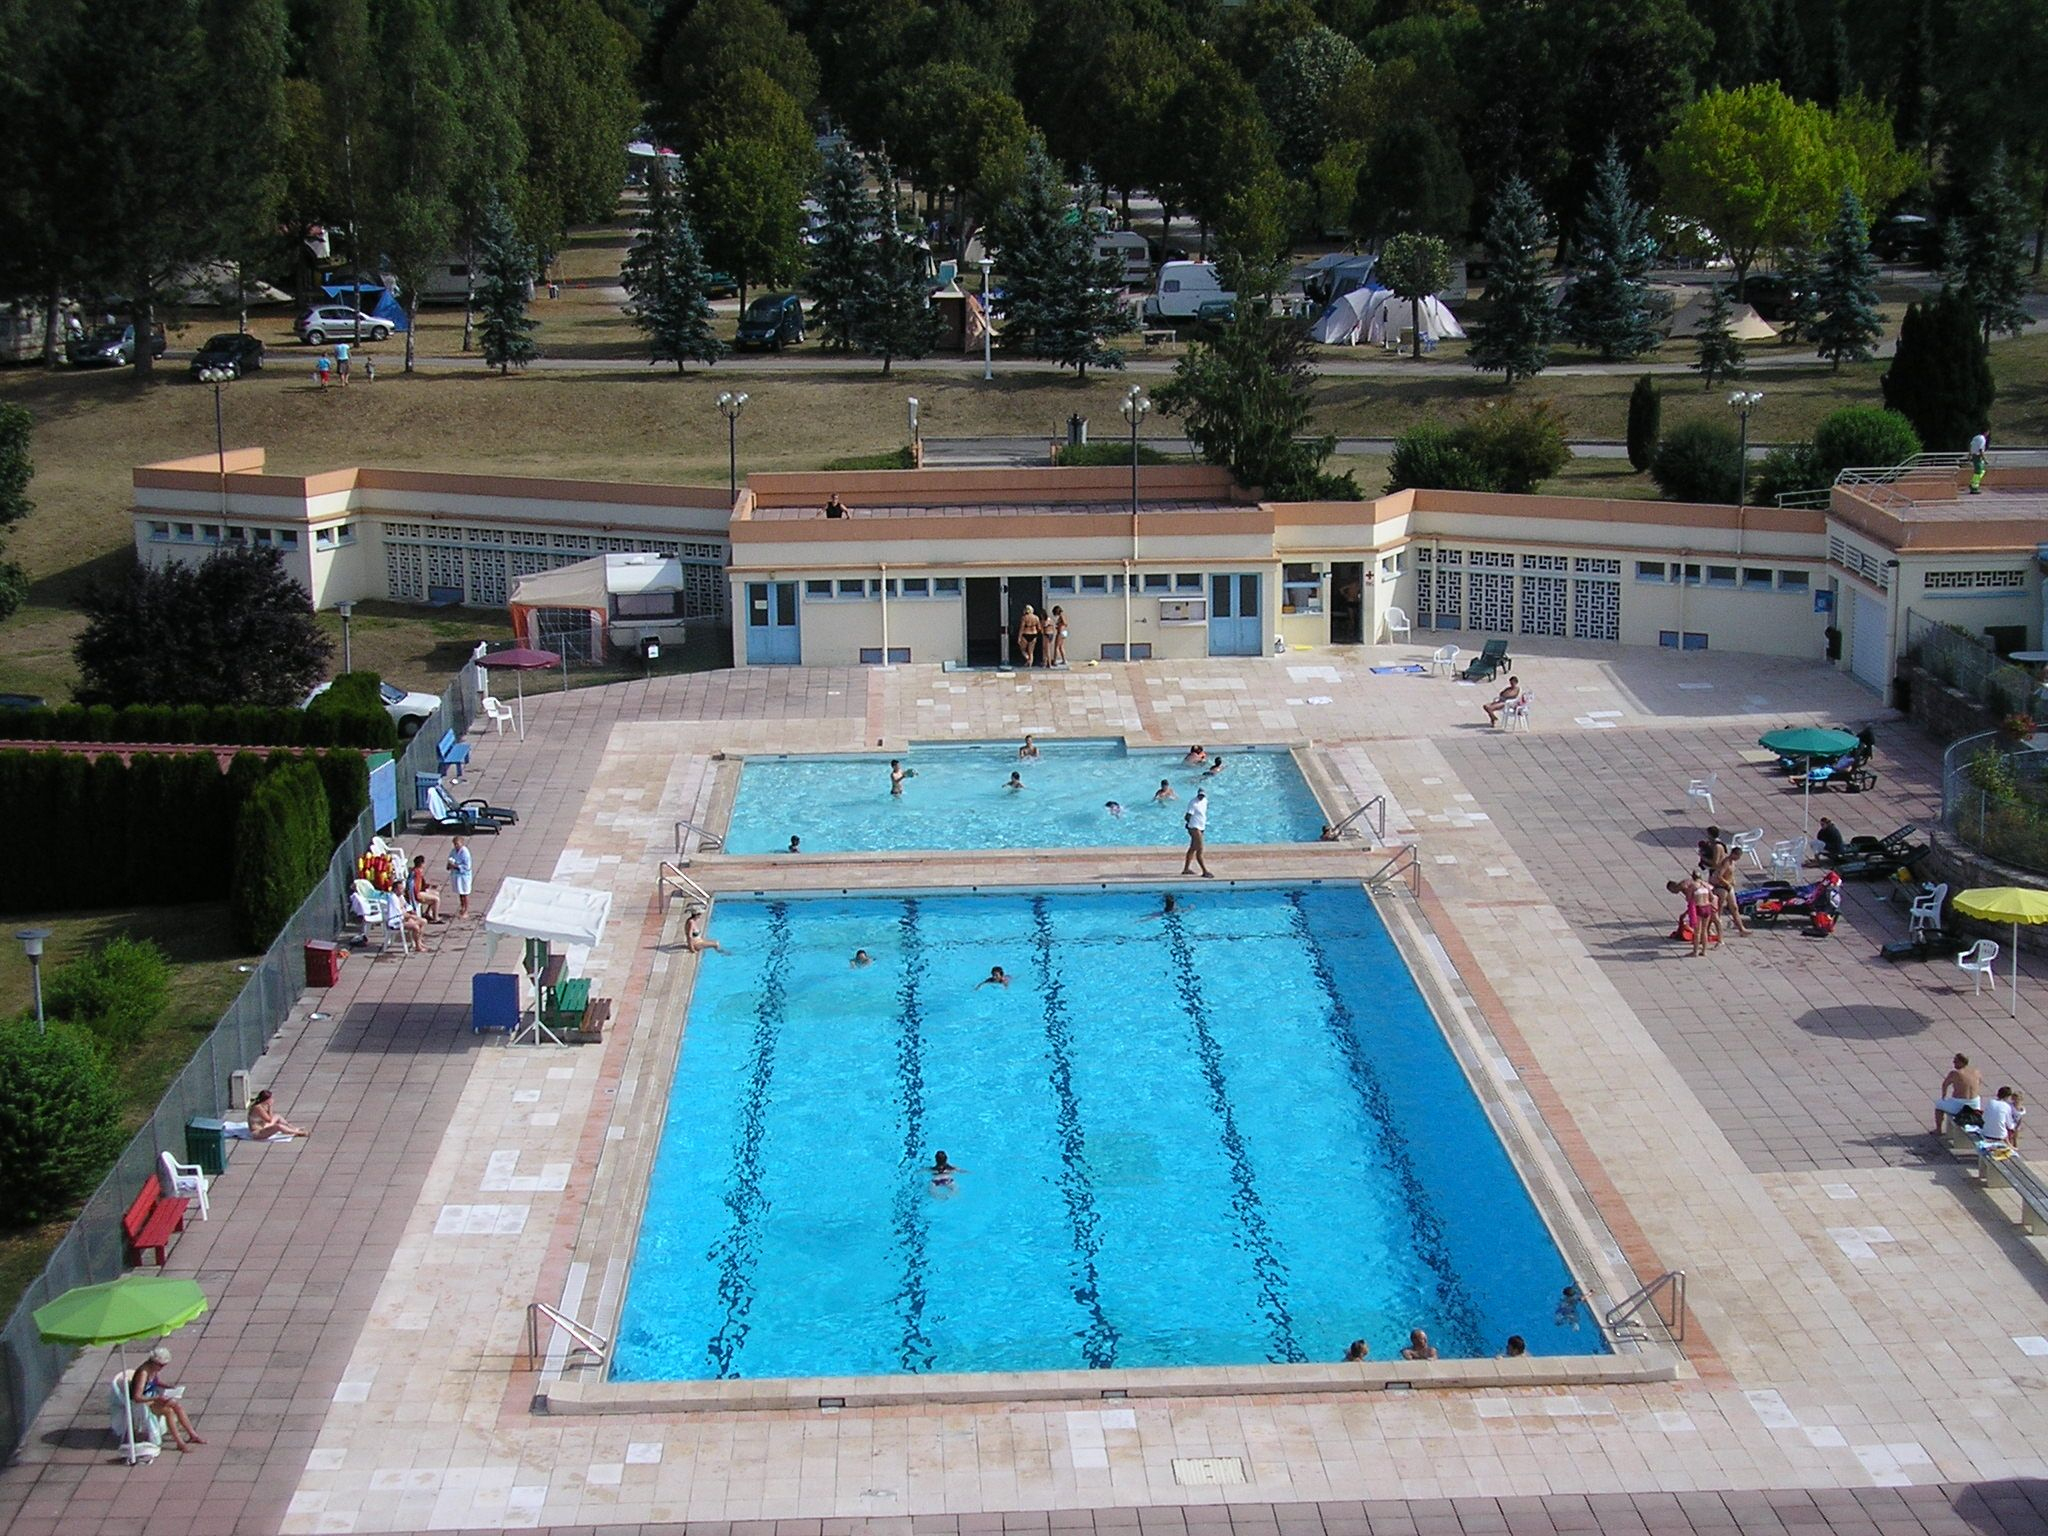 Pin By Glenda Clemson On Pools And Water Parks In 2020 ... encequiconcerne Franche Comté Piscine